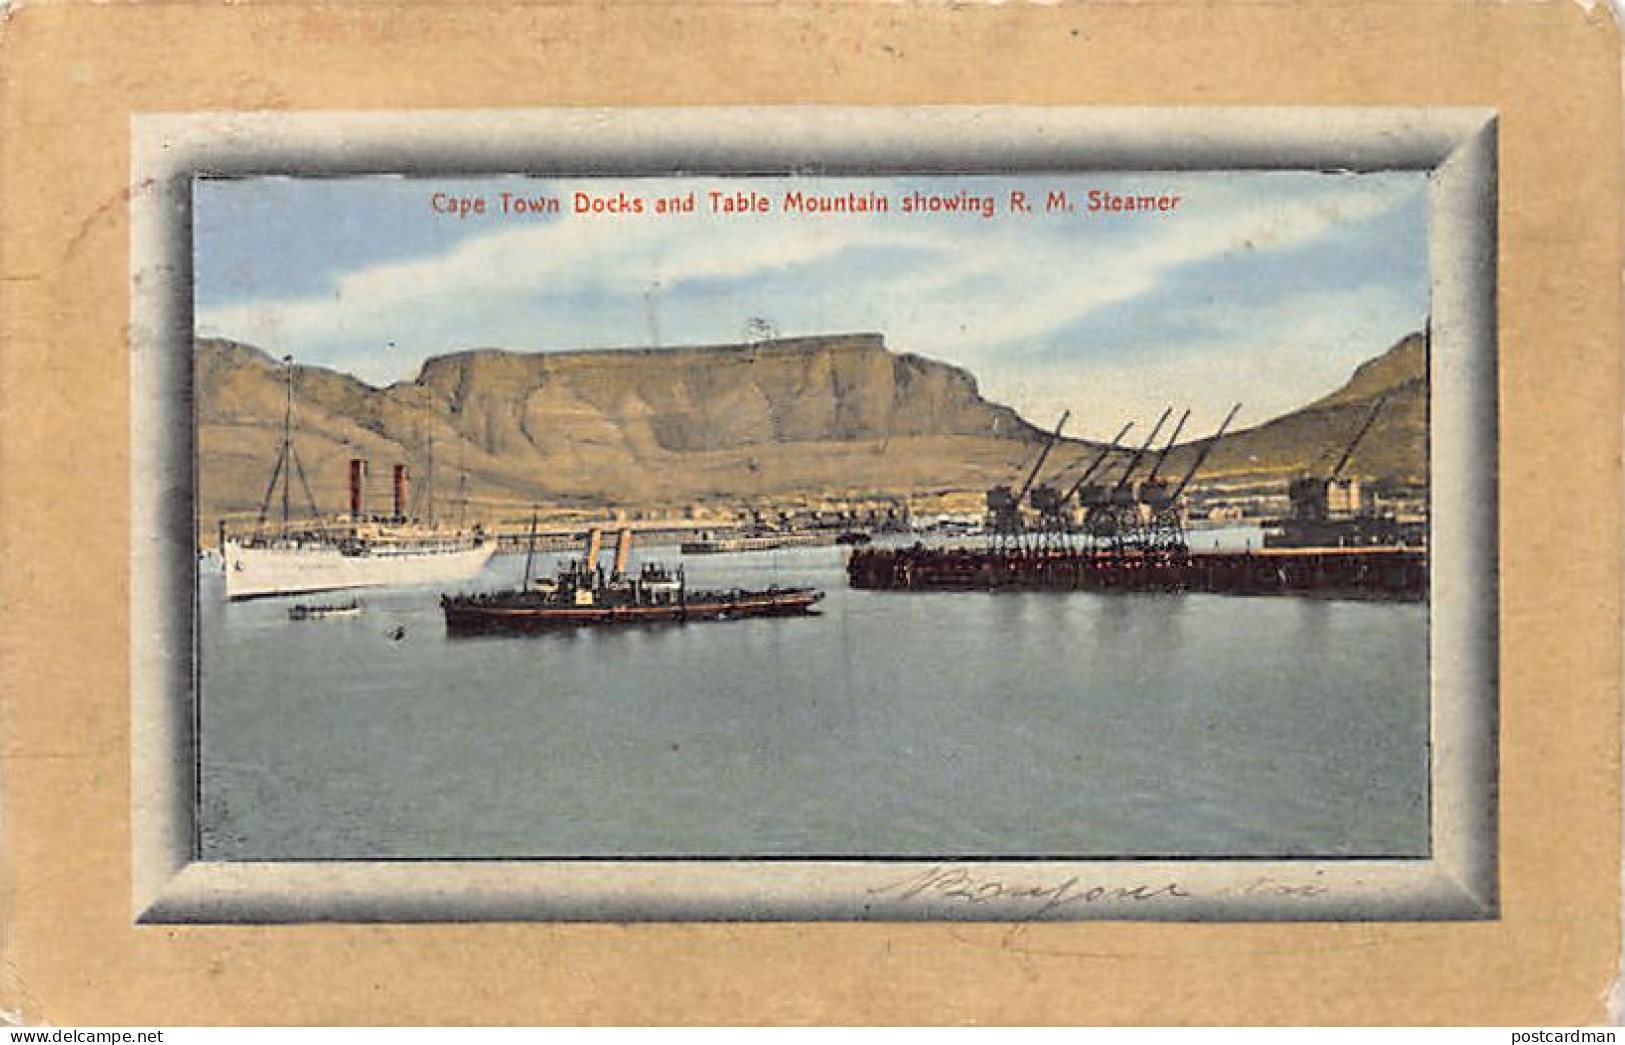 South Africa - CAPE TOWN - Docks And Table Mountain Showing Royal Mail Steamer - Publ. Spes Bona Series  - Zuid-Afrika